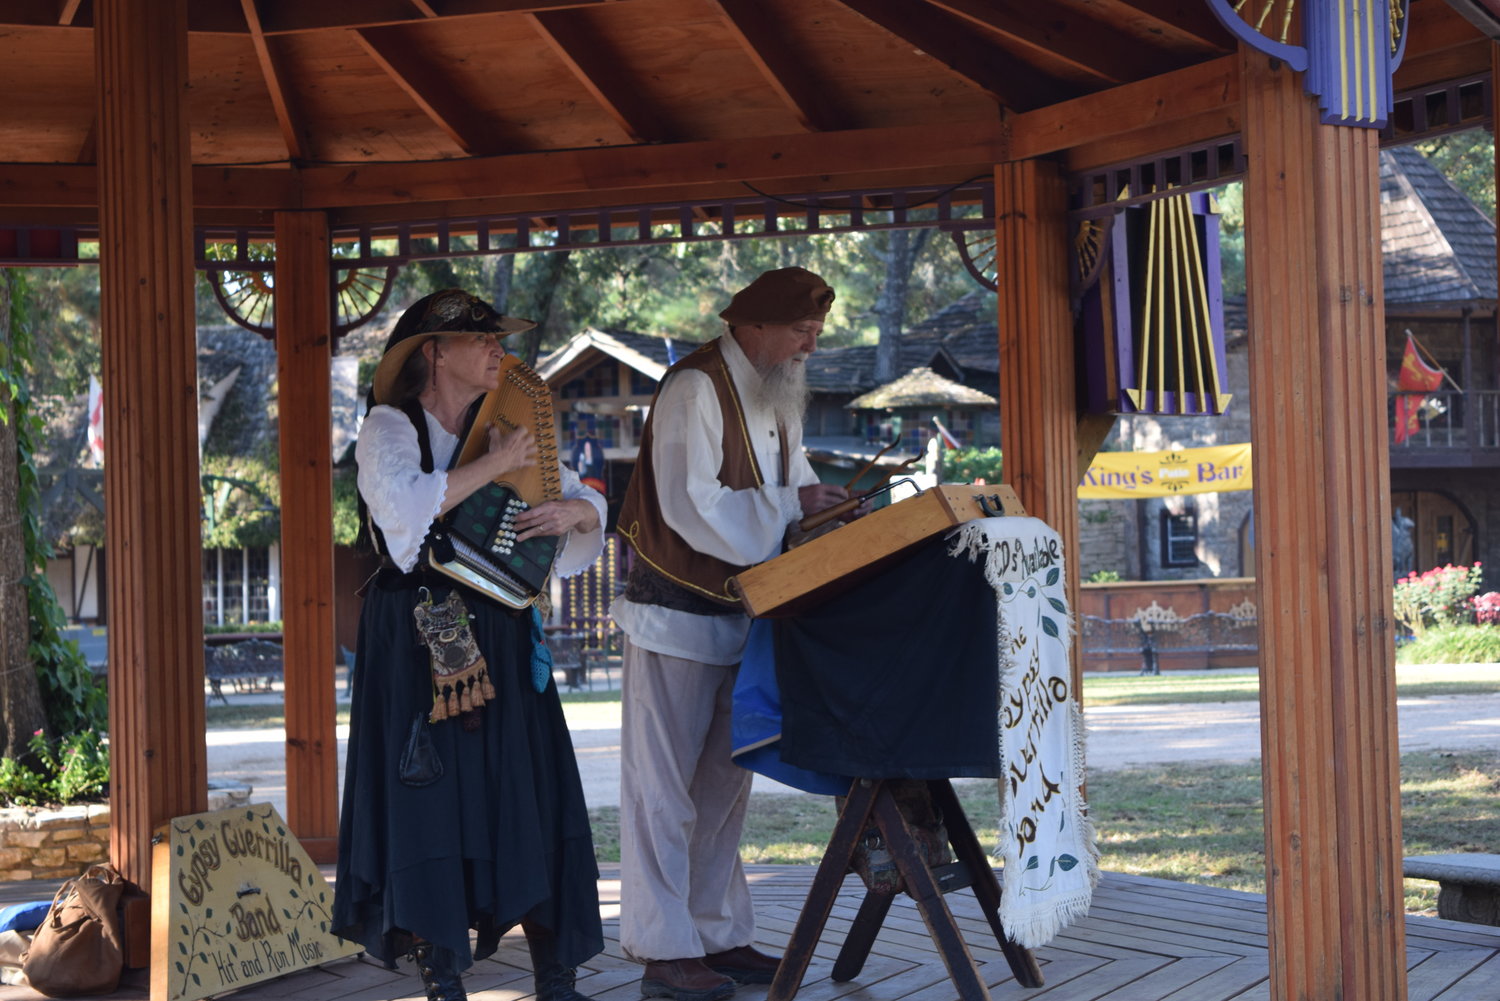 The Gypsy Guerilla Band is one of many returning acts that perform each year at the festival. Many of the musical groups at the fair perform using instruments and styles of music that are centuries-old traditions.